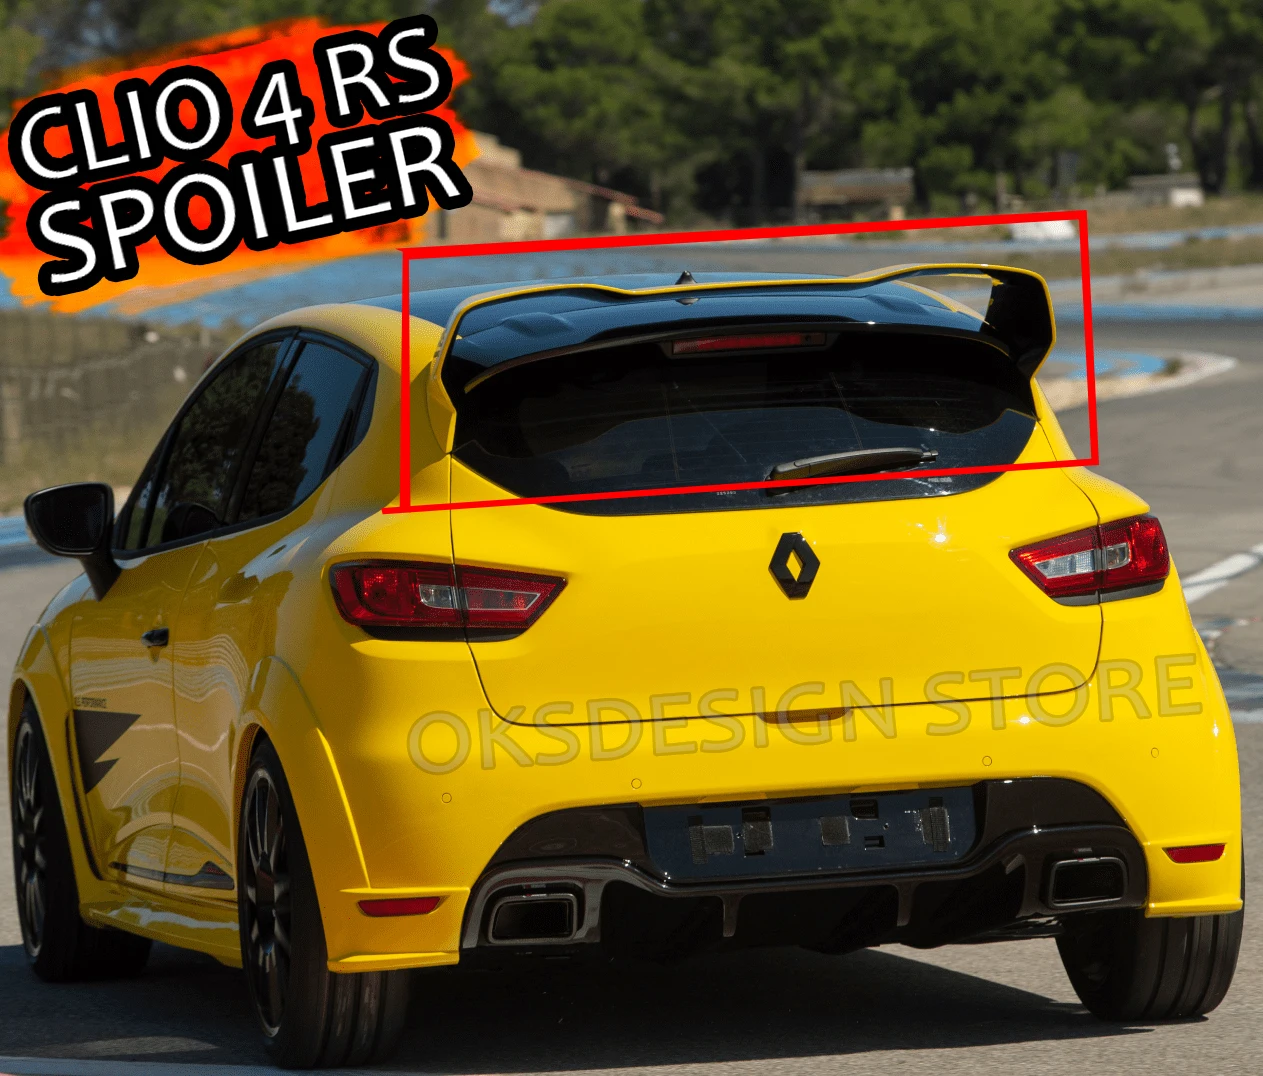 FOR Renault 4 RS Style Trunk Spoiler ( Fiberglas ) For Clio 4 2012 2013 2014 2015 2016 2017 2019|Spoilers & Wings| - AliExpress